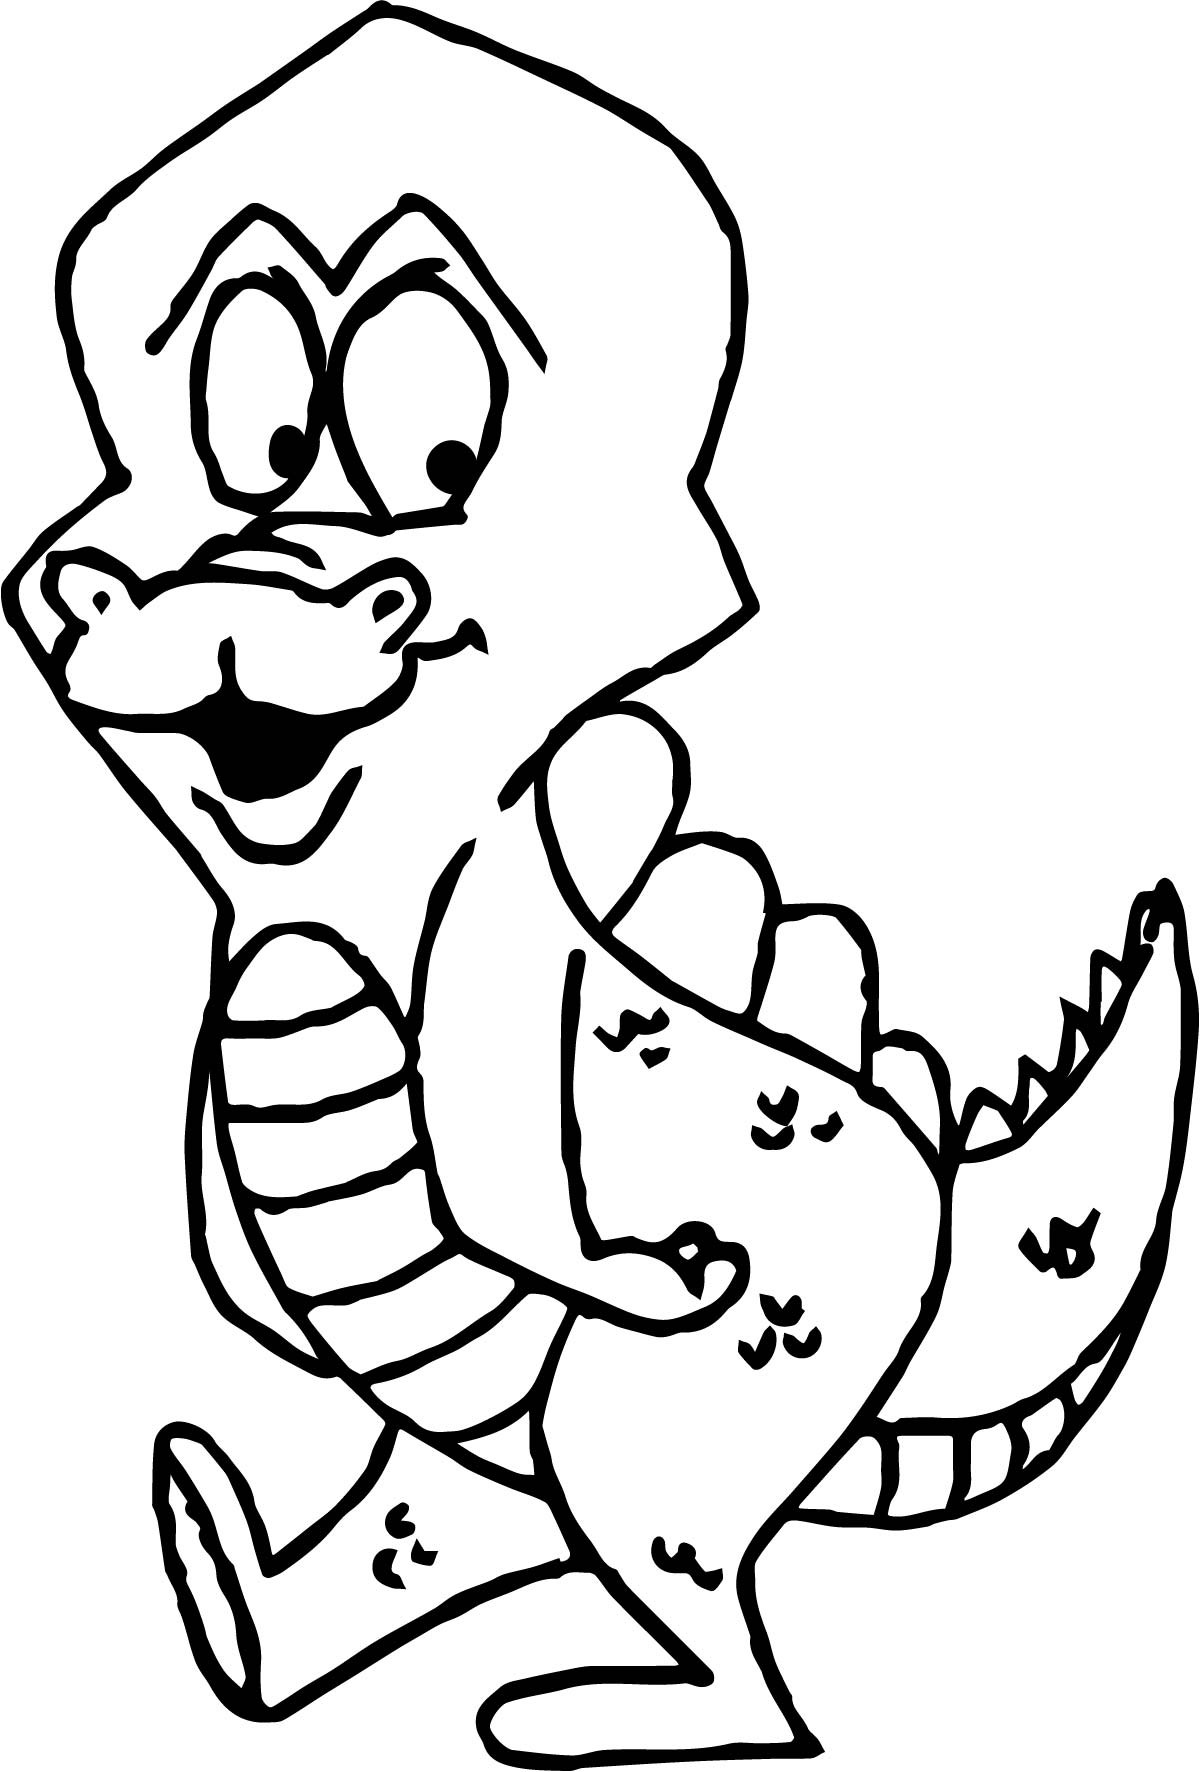 Baby Farm Animal Coloring Pages
 Baby Dinosaur Animal Farm Coloring Page